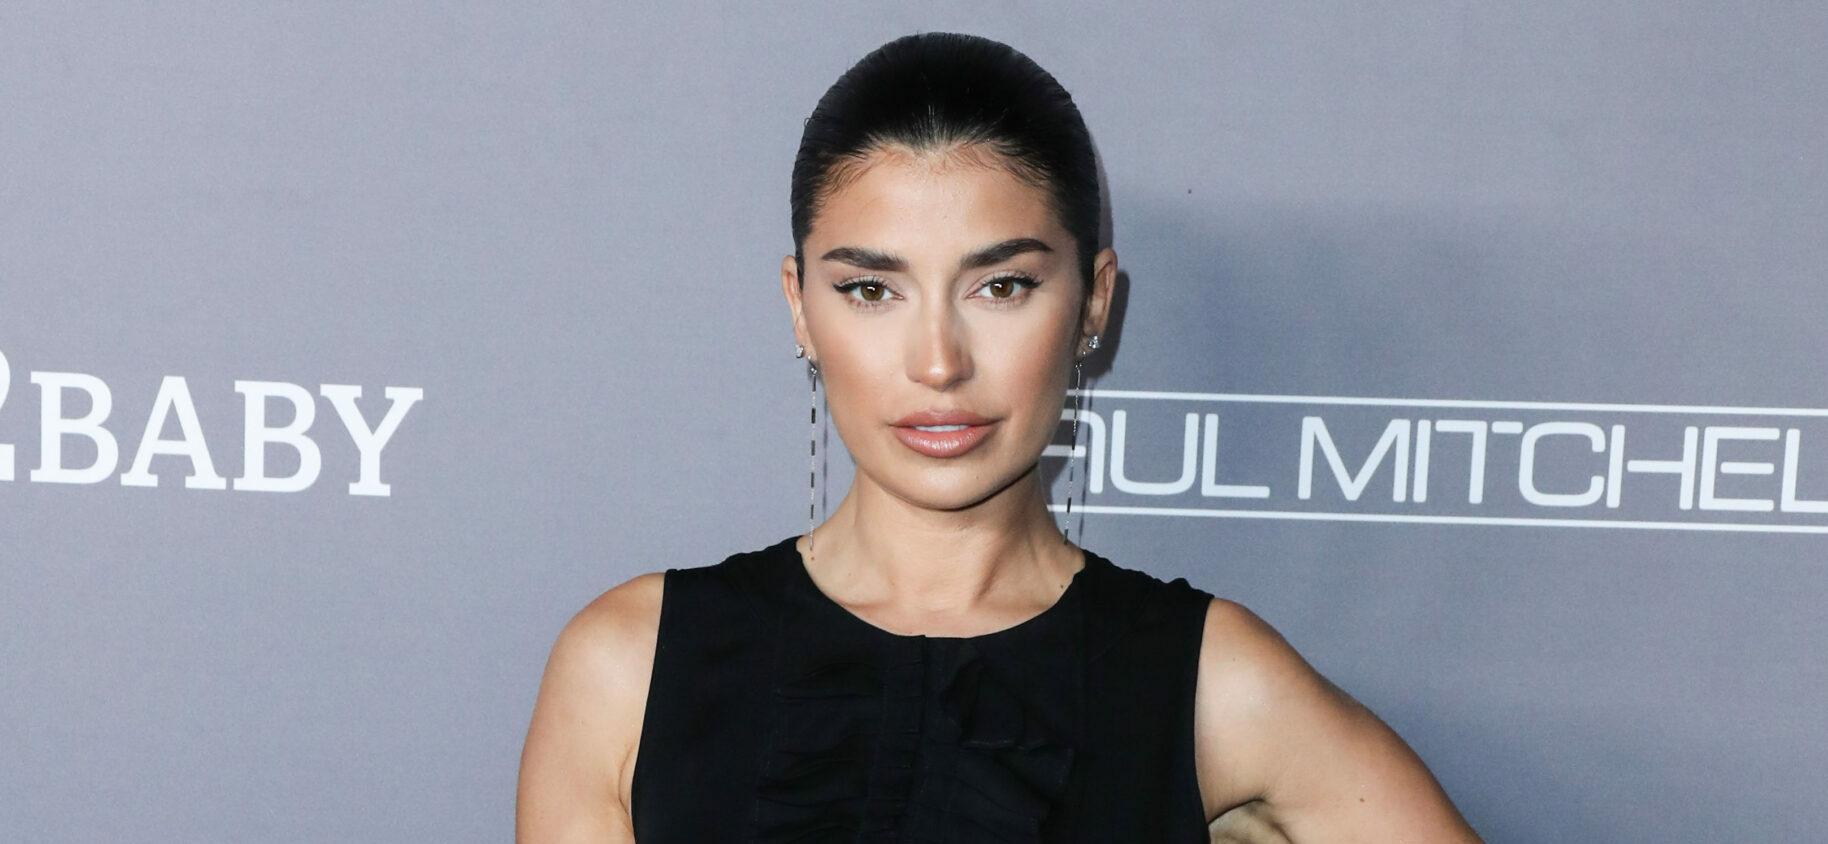 Nicole Williams English Gives An Honest Look At ‘Mom Life’